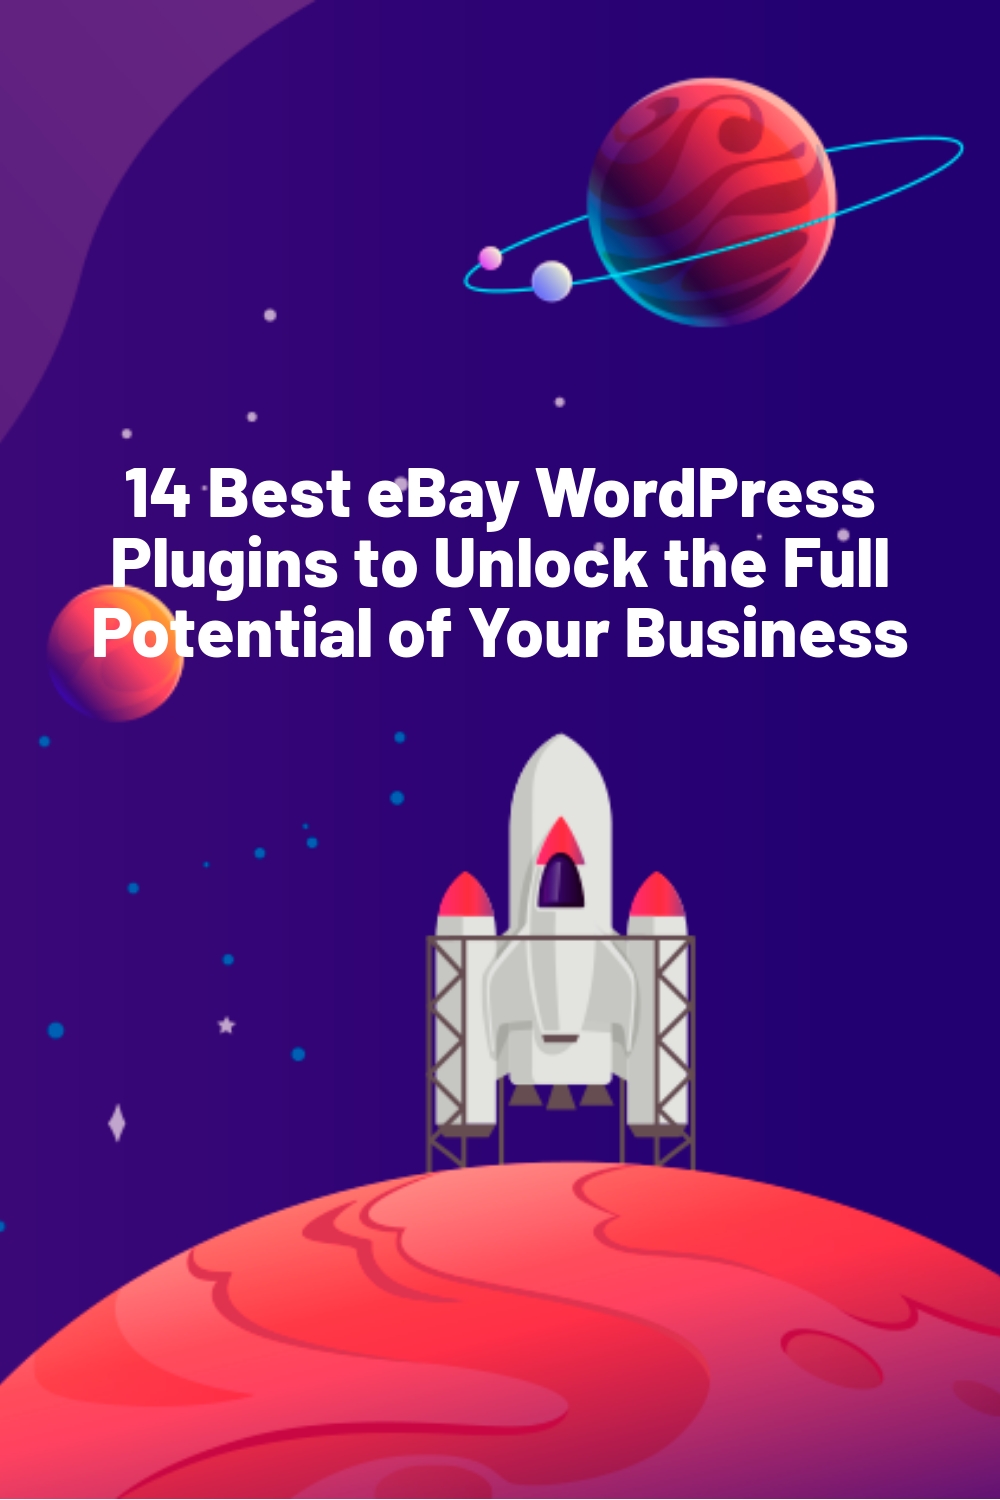 14 Best eBay WordPress Plugins to Unlock the Full Potential of Your Business